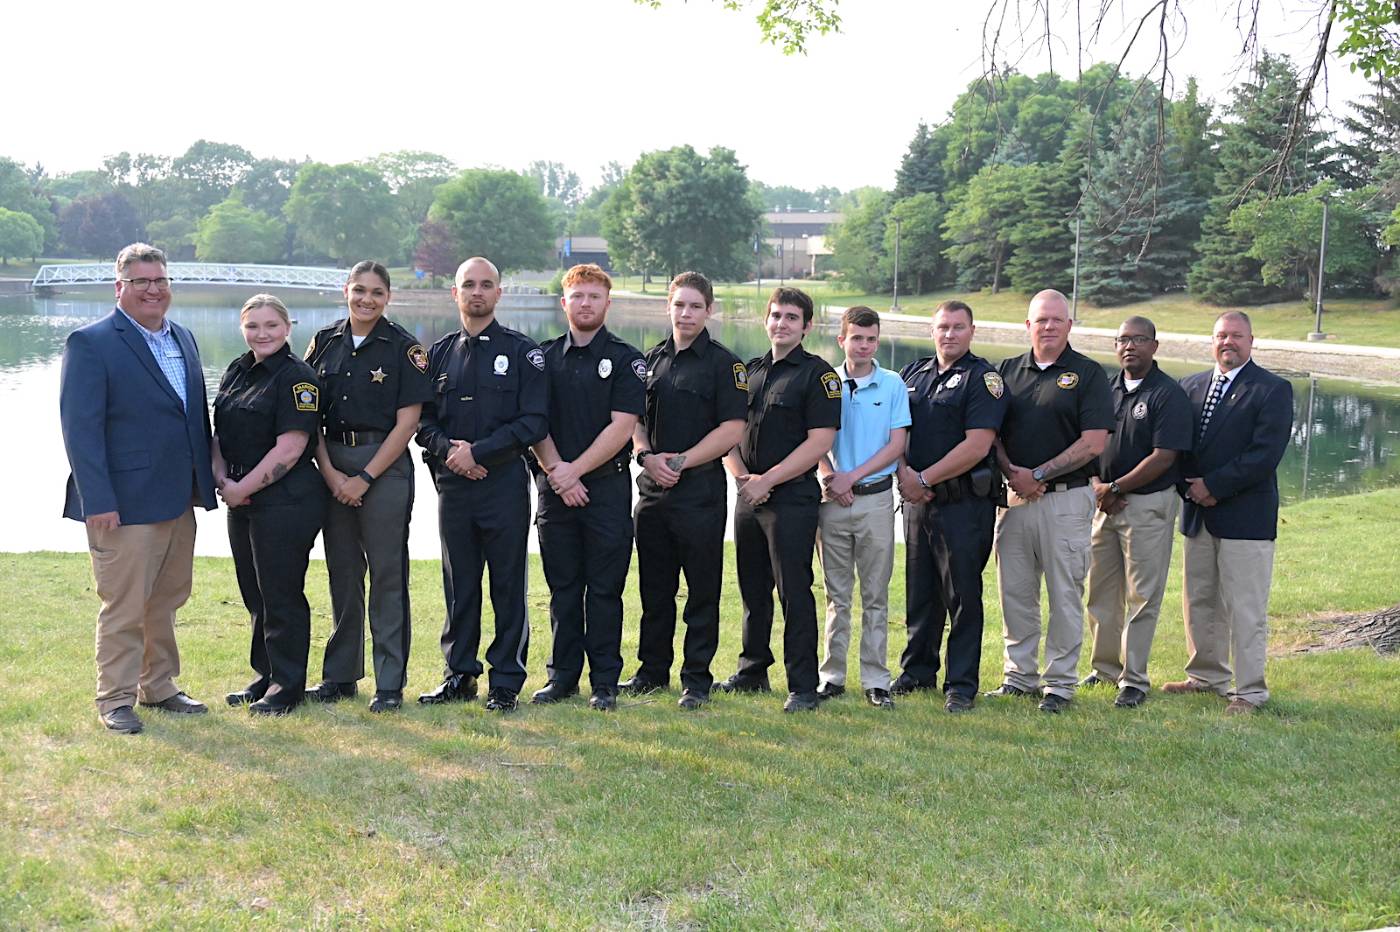 Police office training academy class group photo on campus outdoors